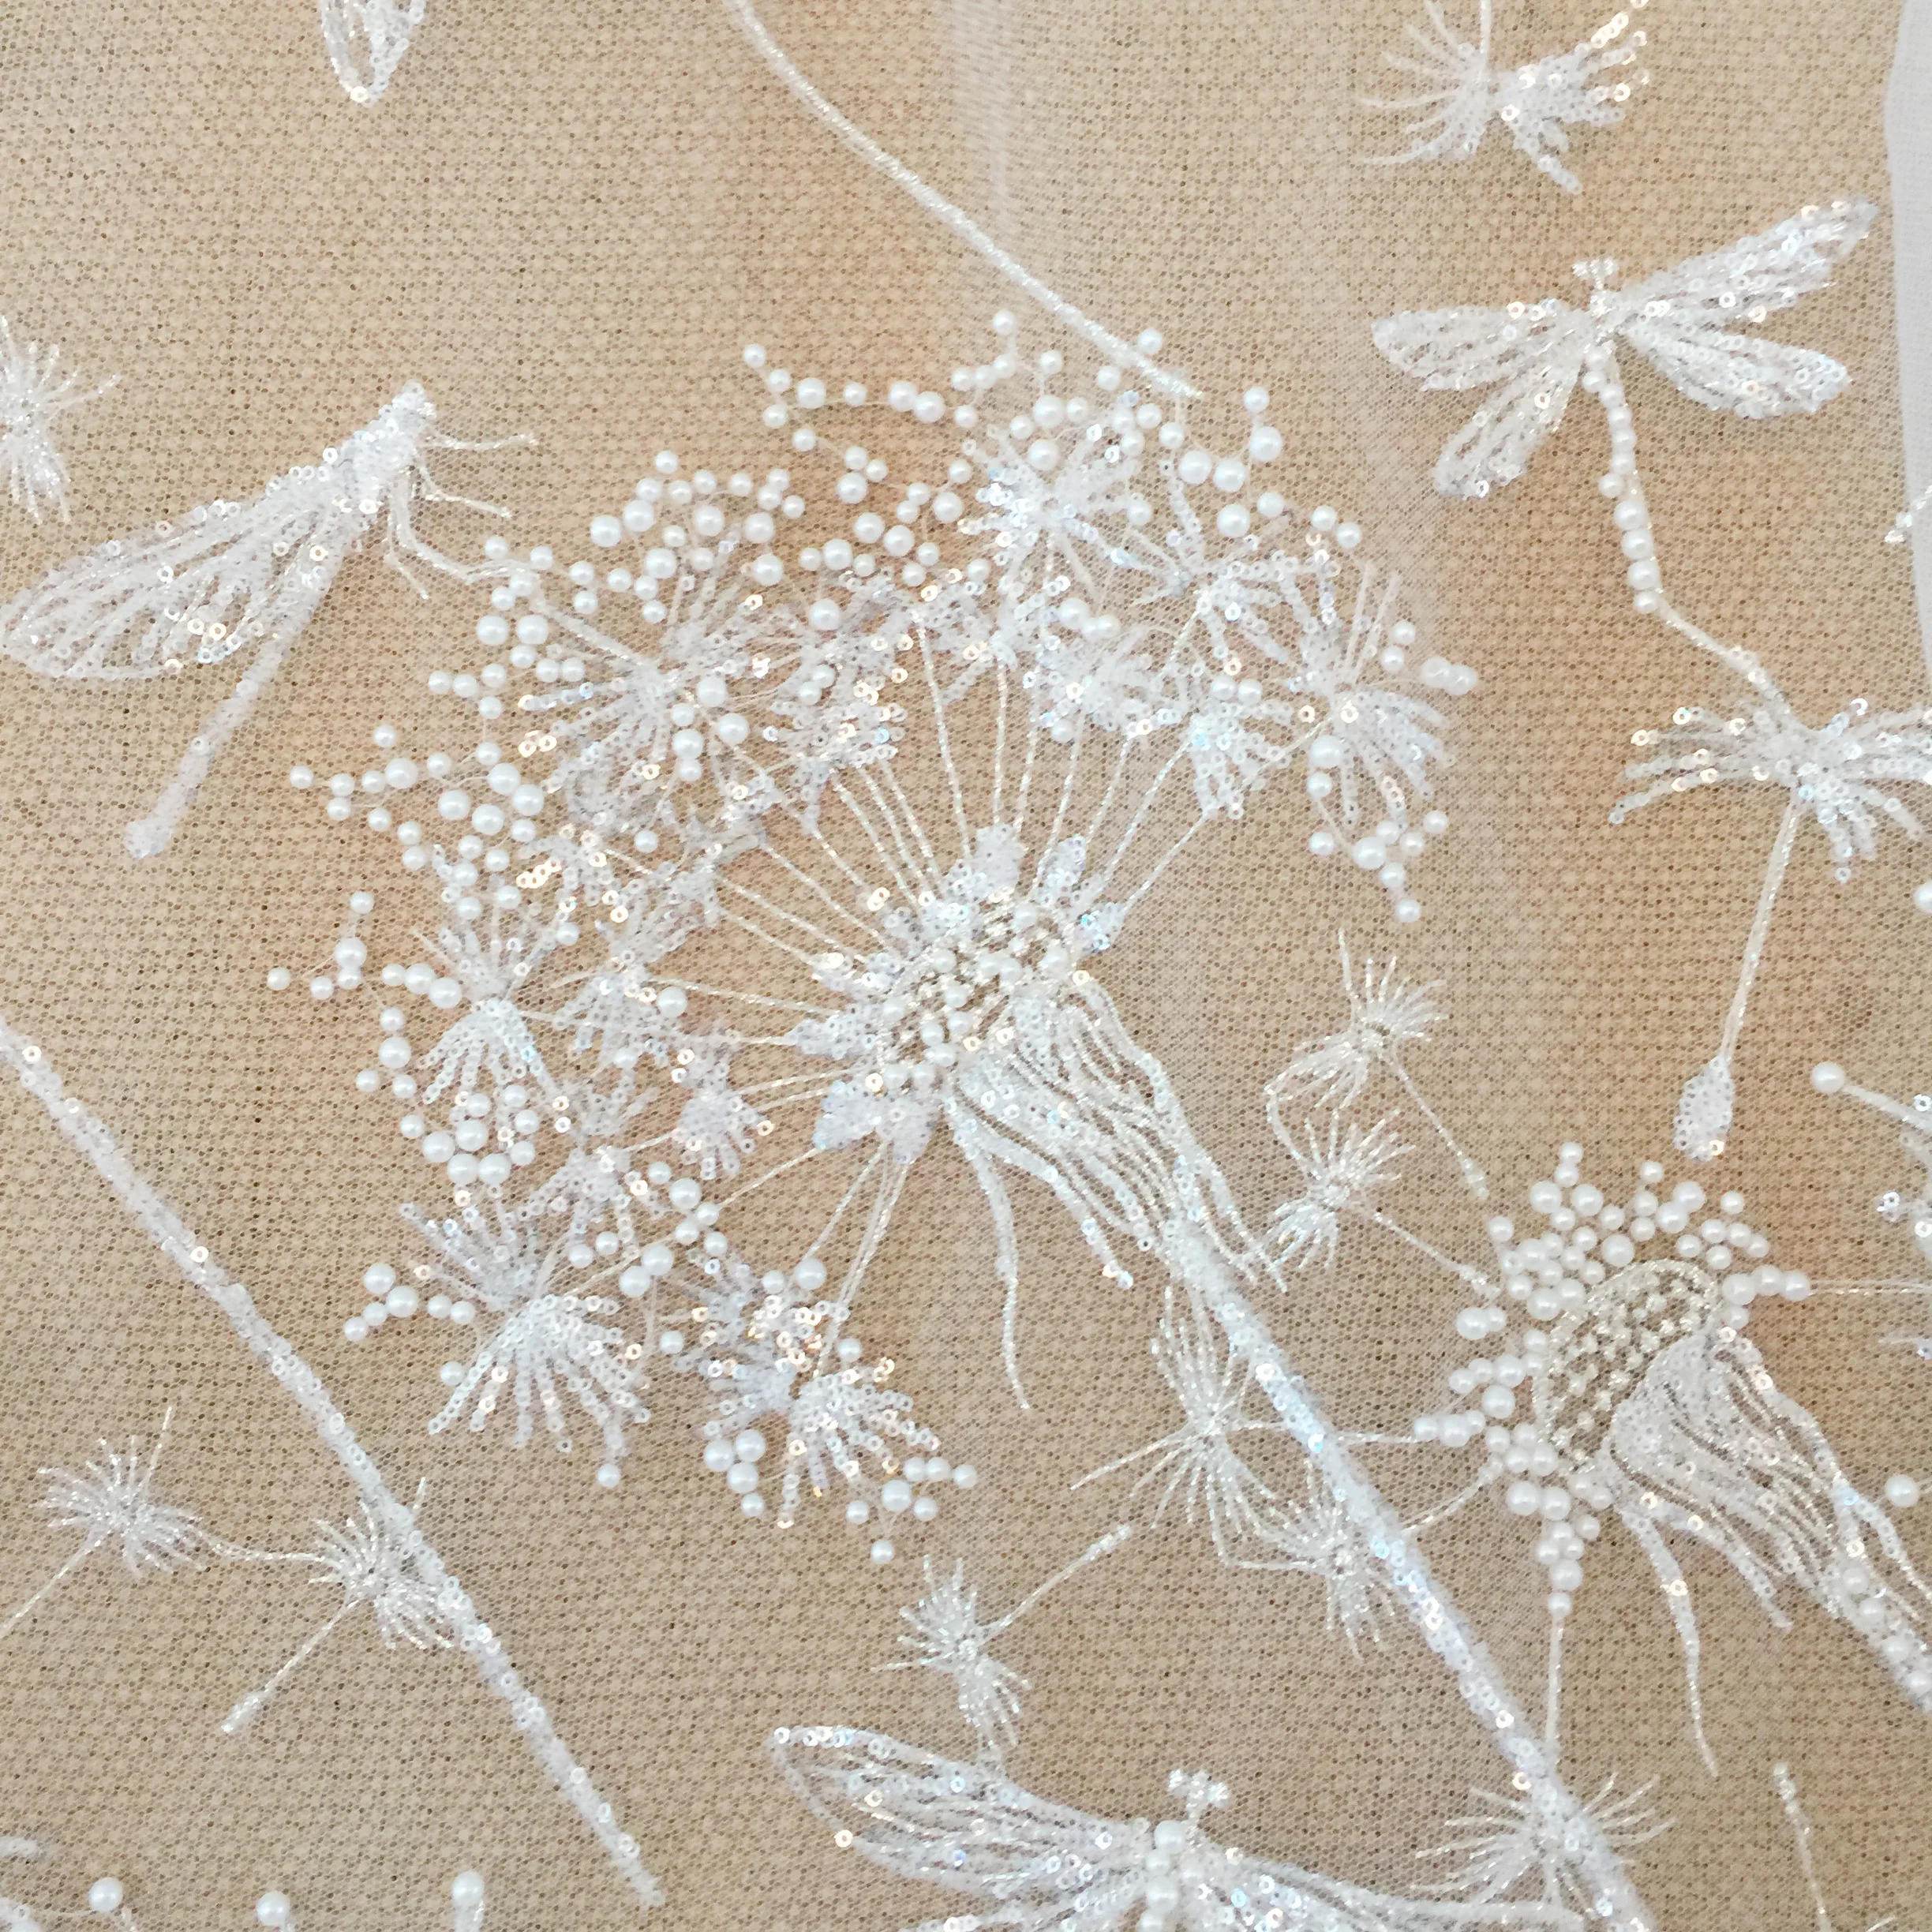 Ivory 3D Beaded Tulle Lace Fabric with Dandelion Dragonfly Haute Couture Weddiing Gown Beach Dress DIY Flower Fabric by Yard